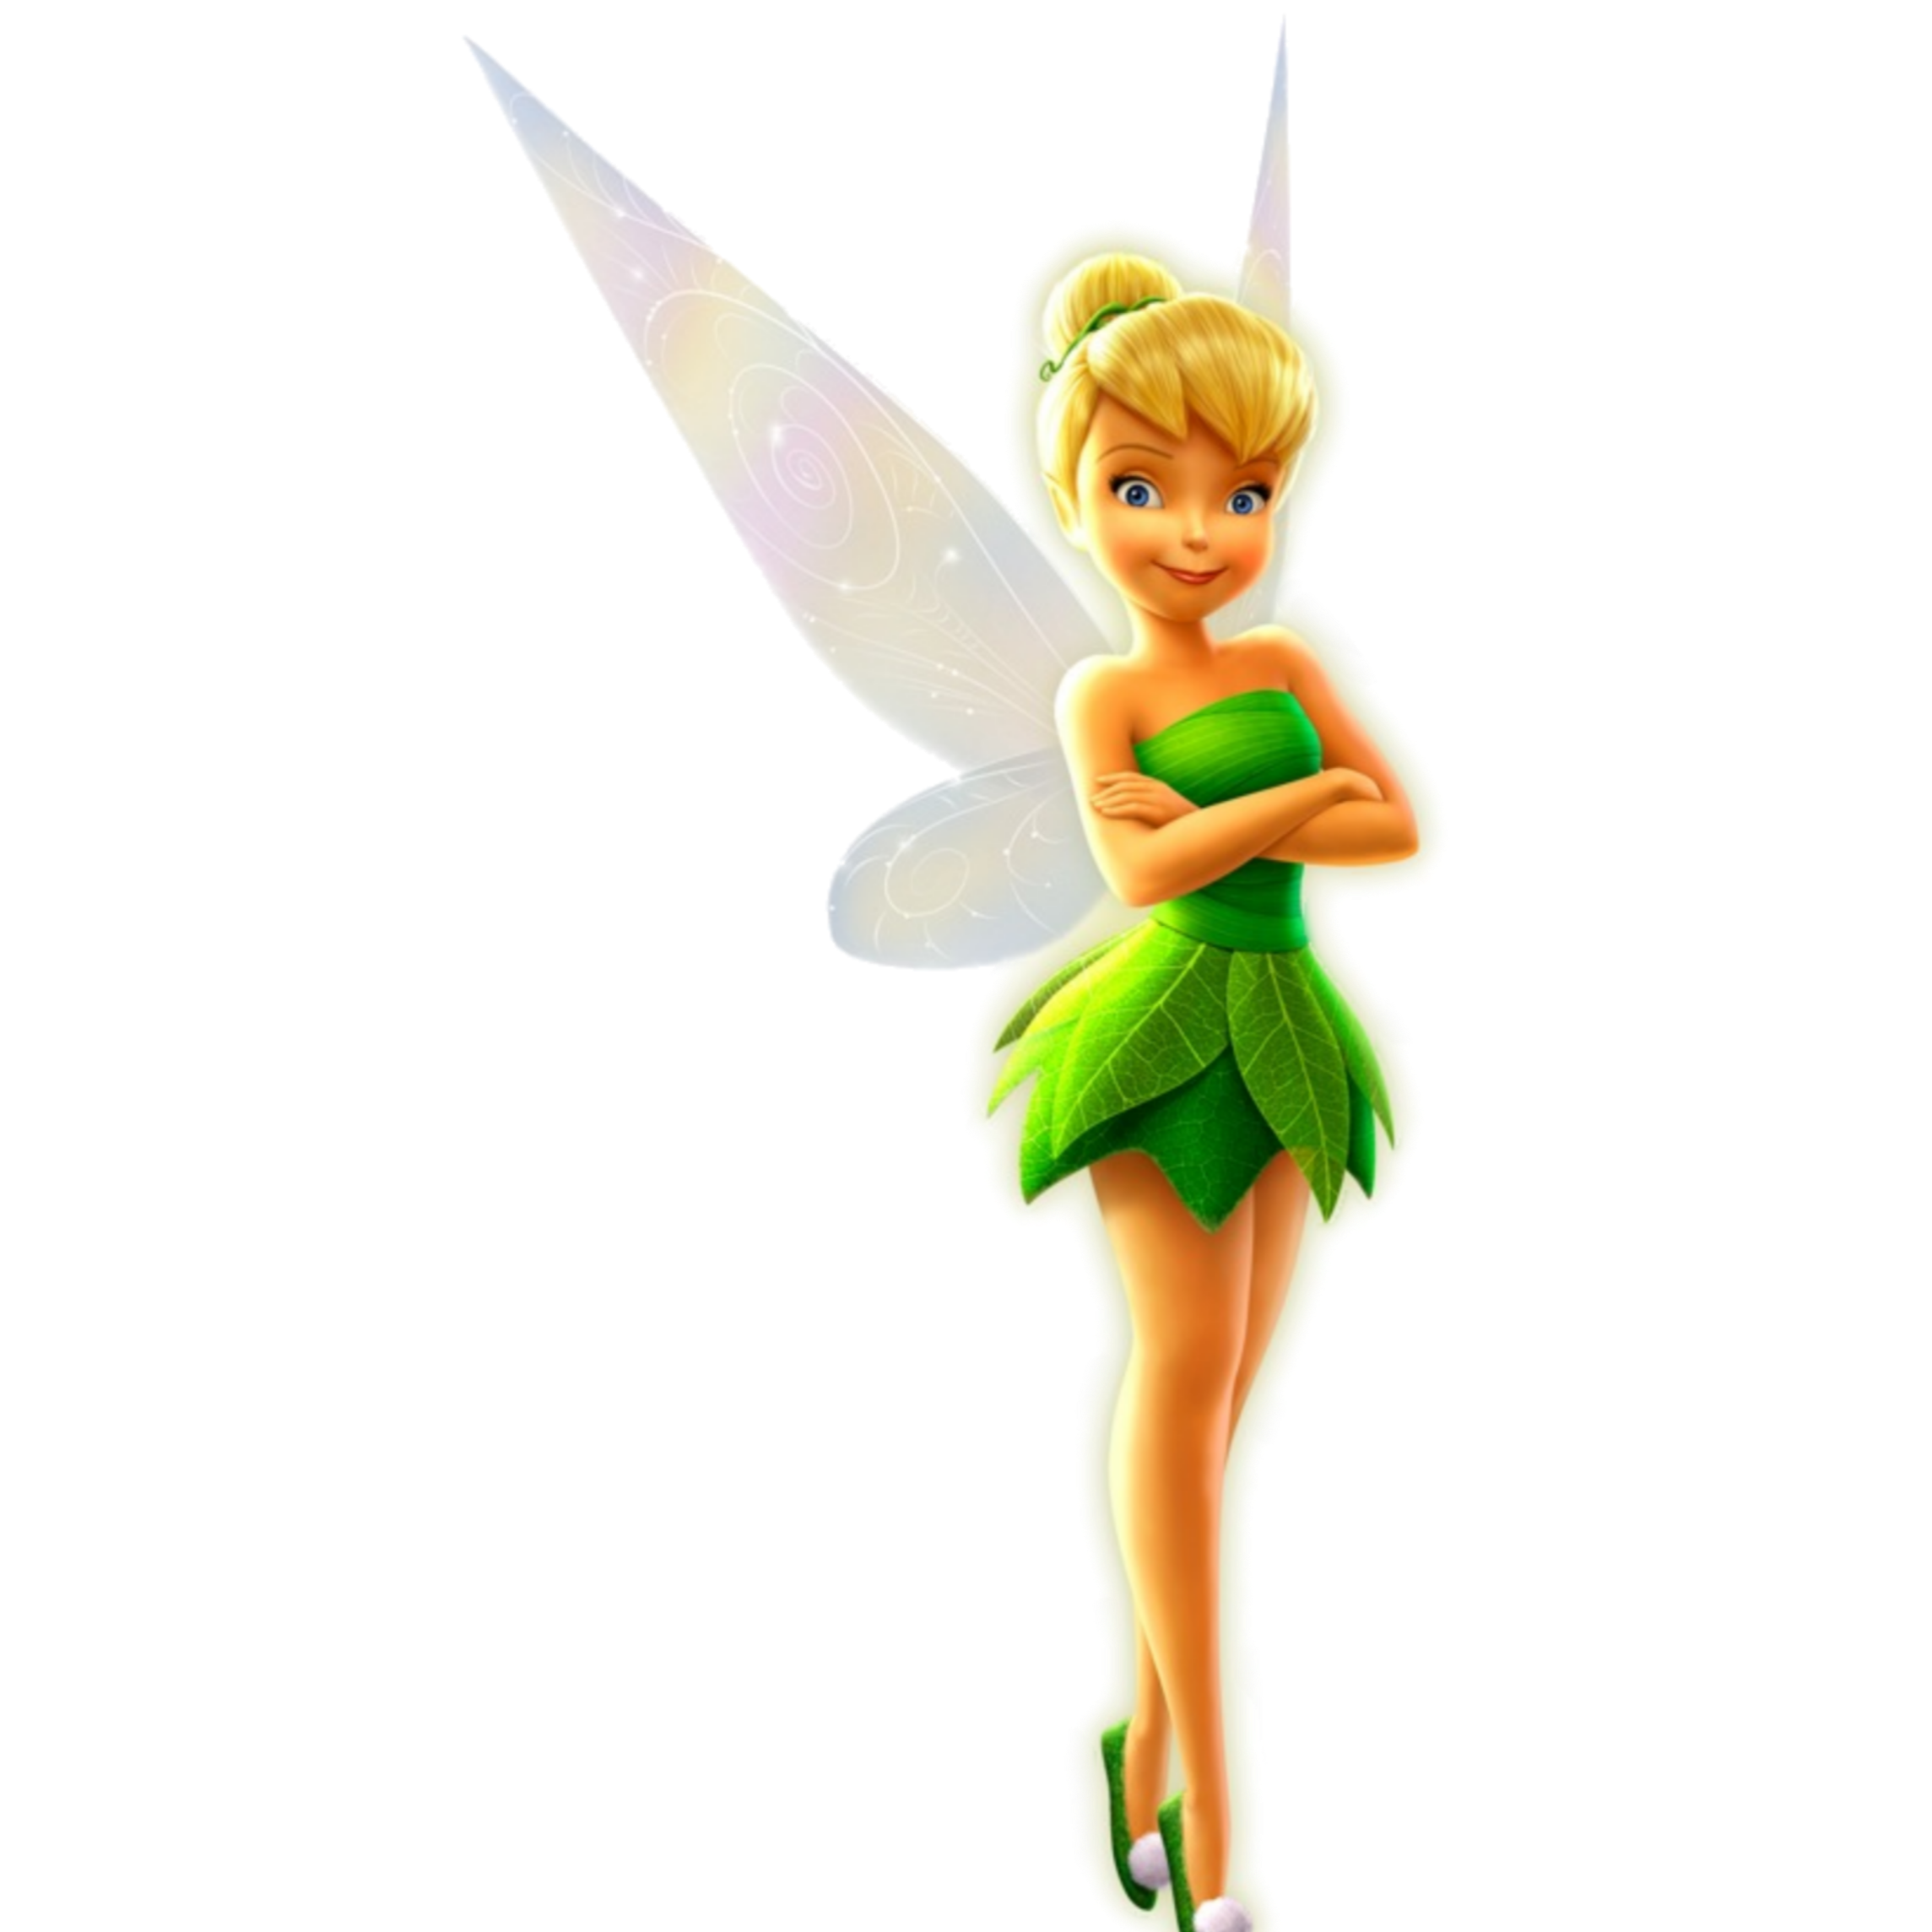 This visual is about tinkerbell fairy freetoedit #tinkerbell #fairy.